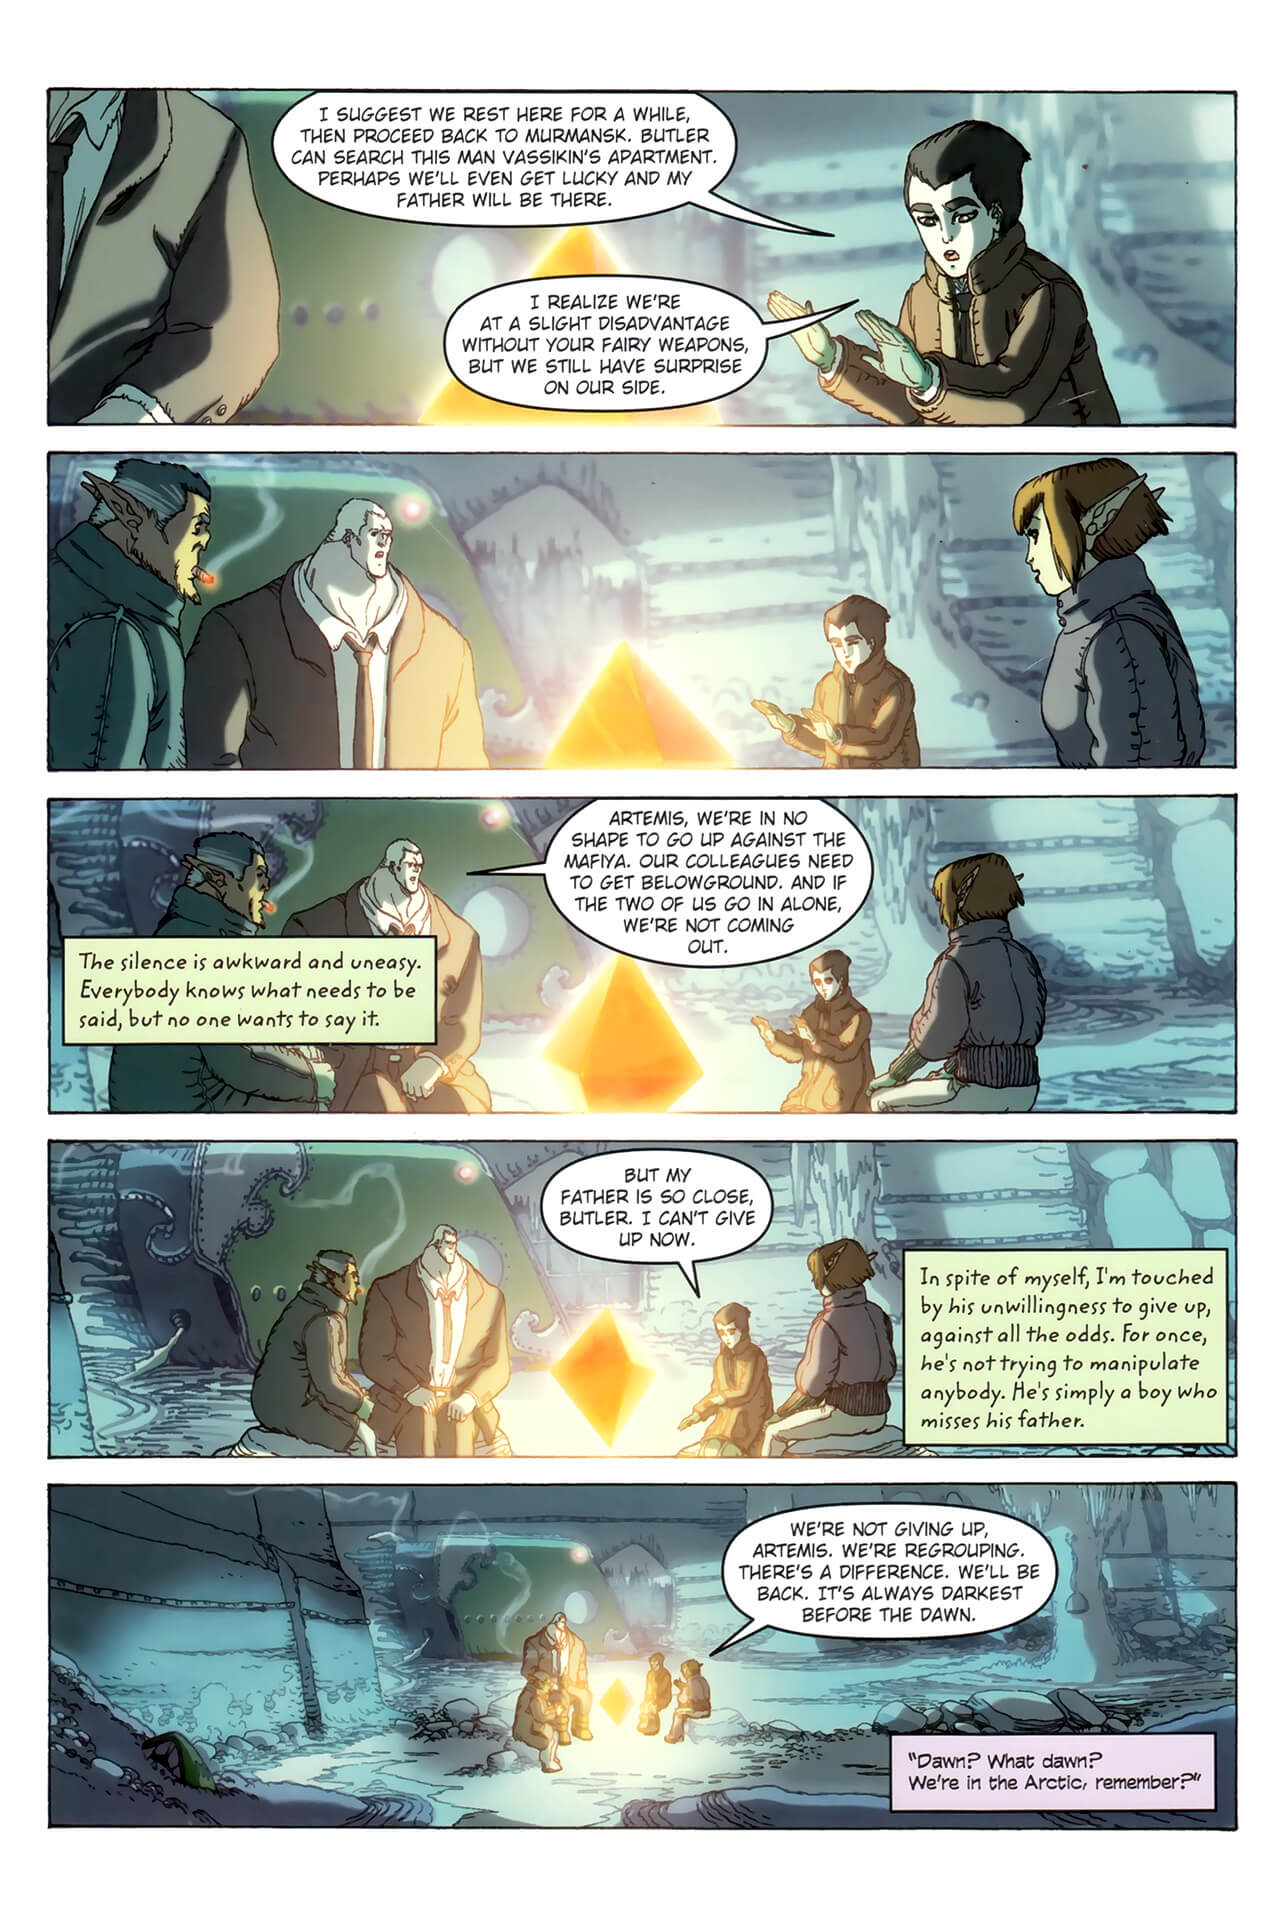 page 76 of artemis fowl the arctic incident graphic novel